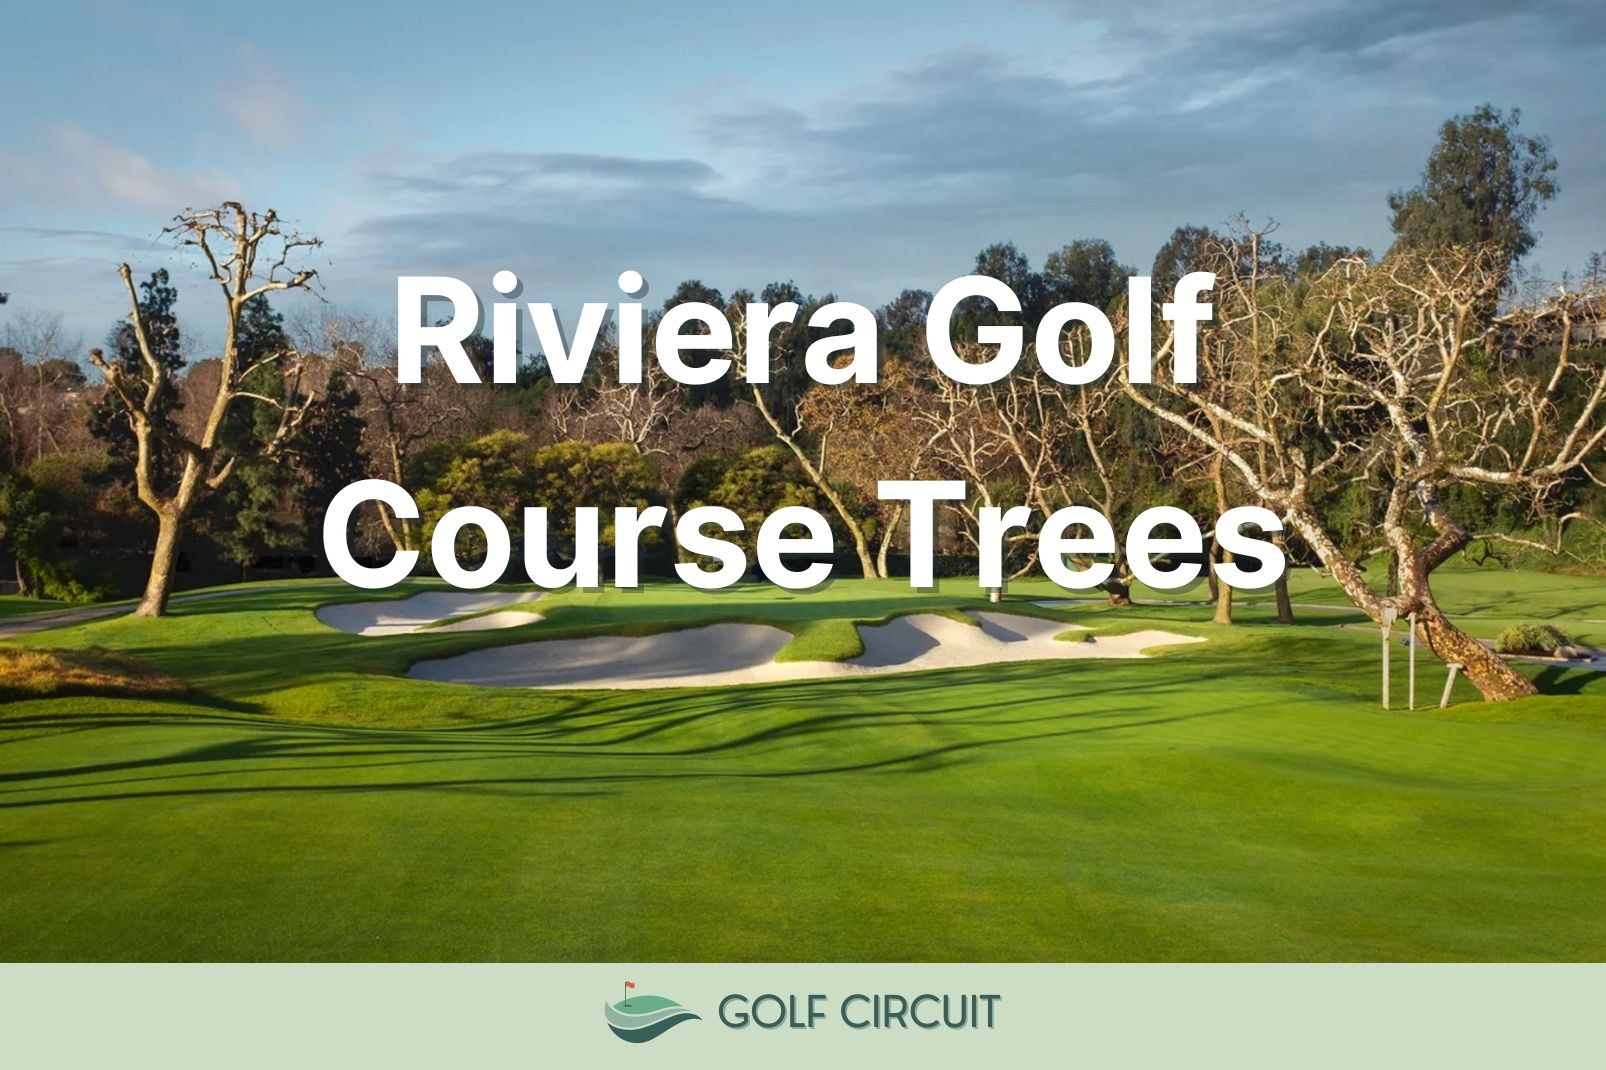 Riviera Golf Course Trees: What Are They? (Explained) - Golf Circuit